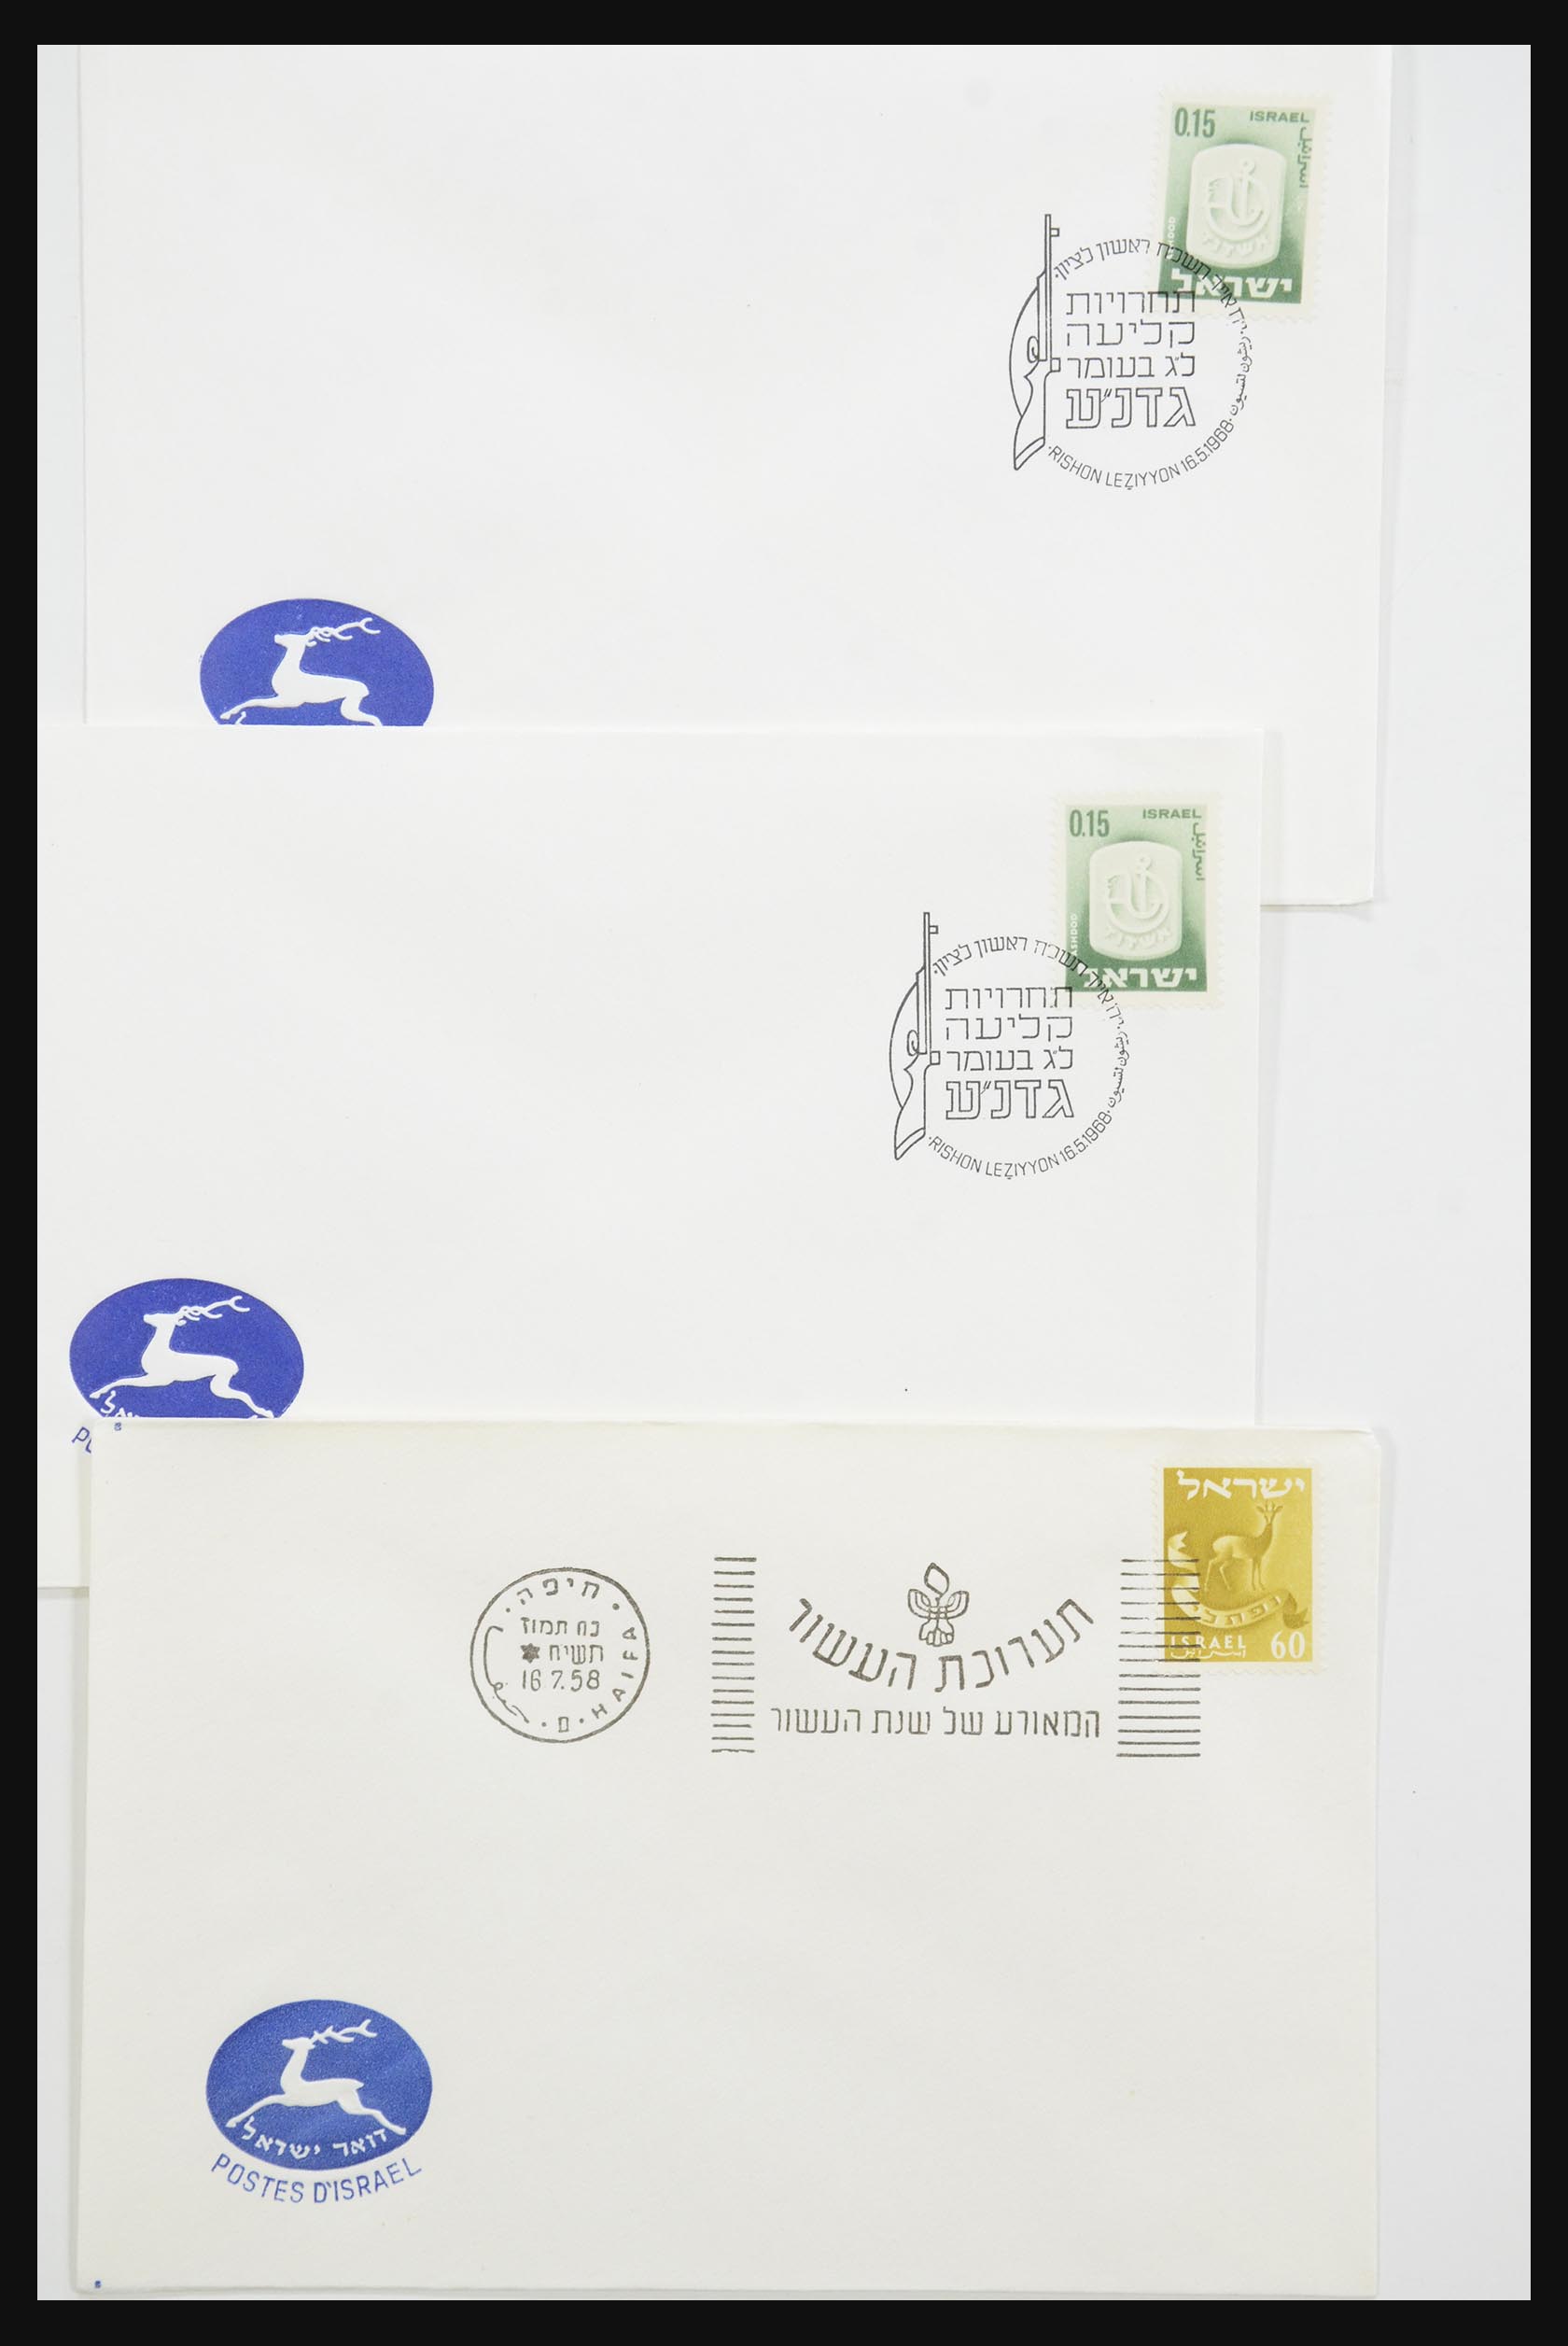 31924 090 - 31924 Israel first day cover collection 1957-2003.